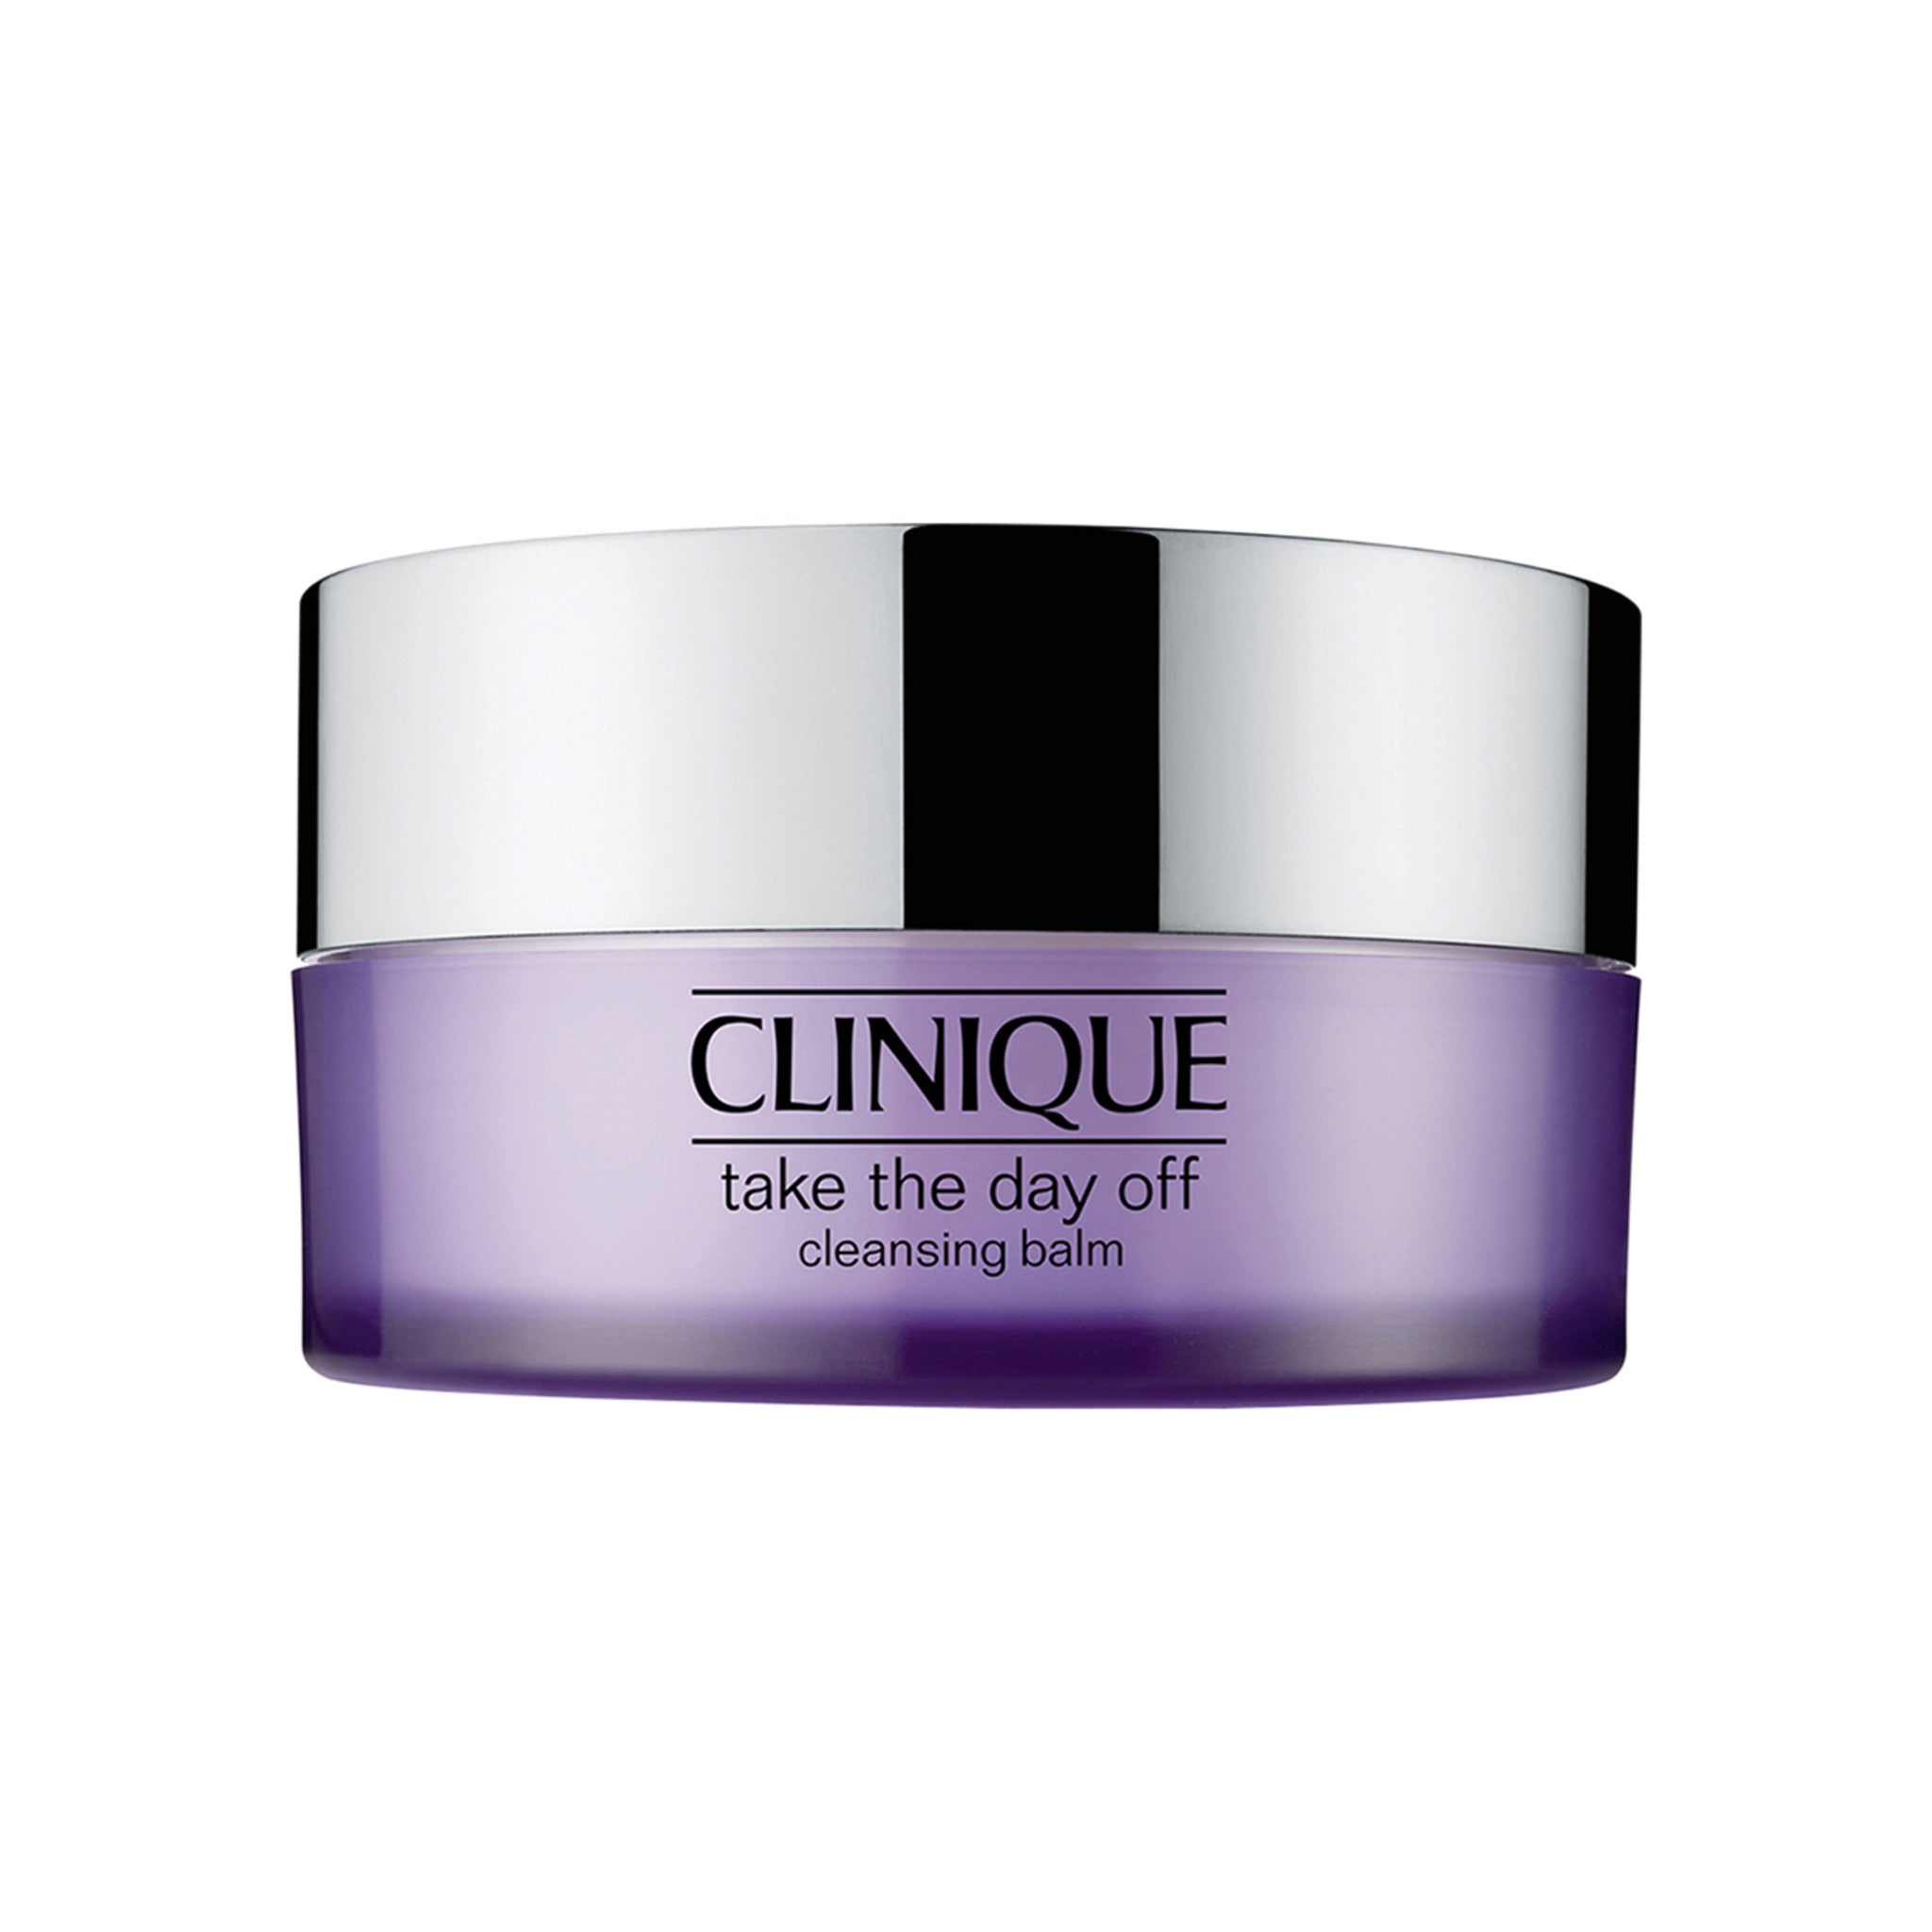 Clinique Take The Day Off Cleansing Balm main image.